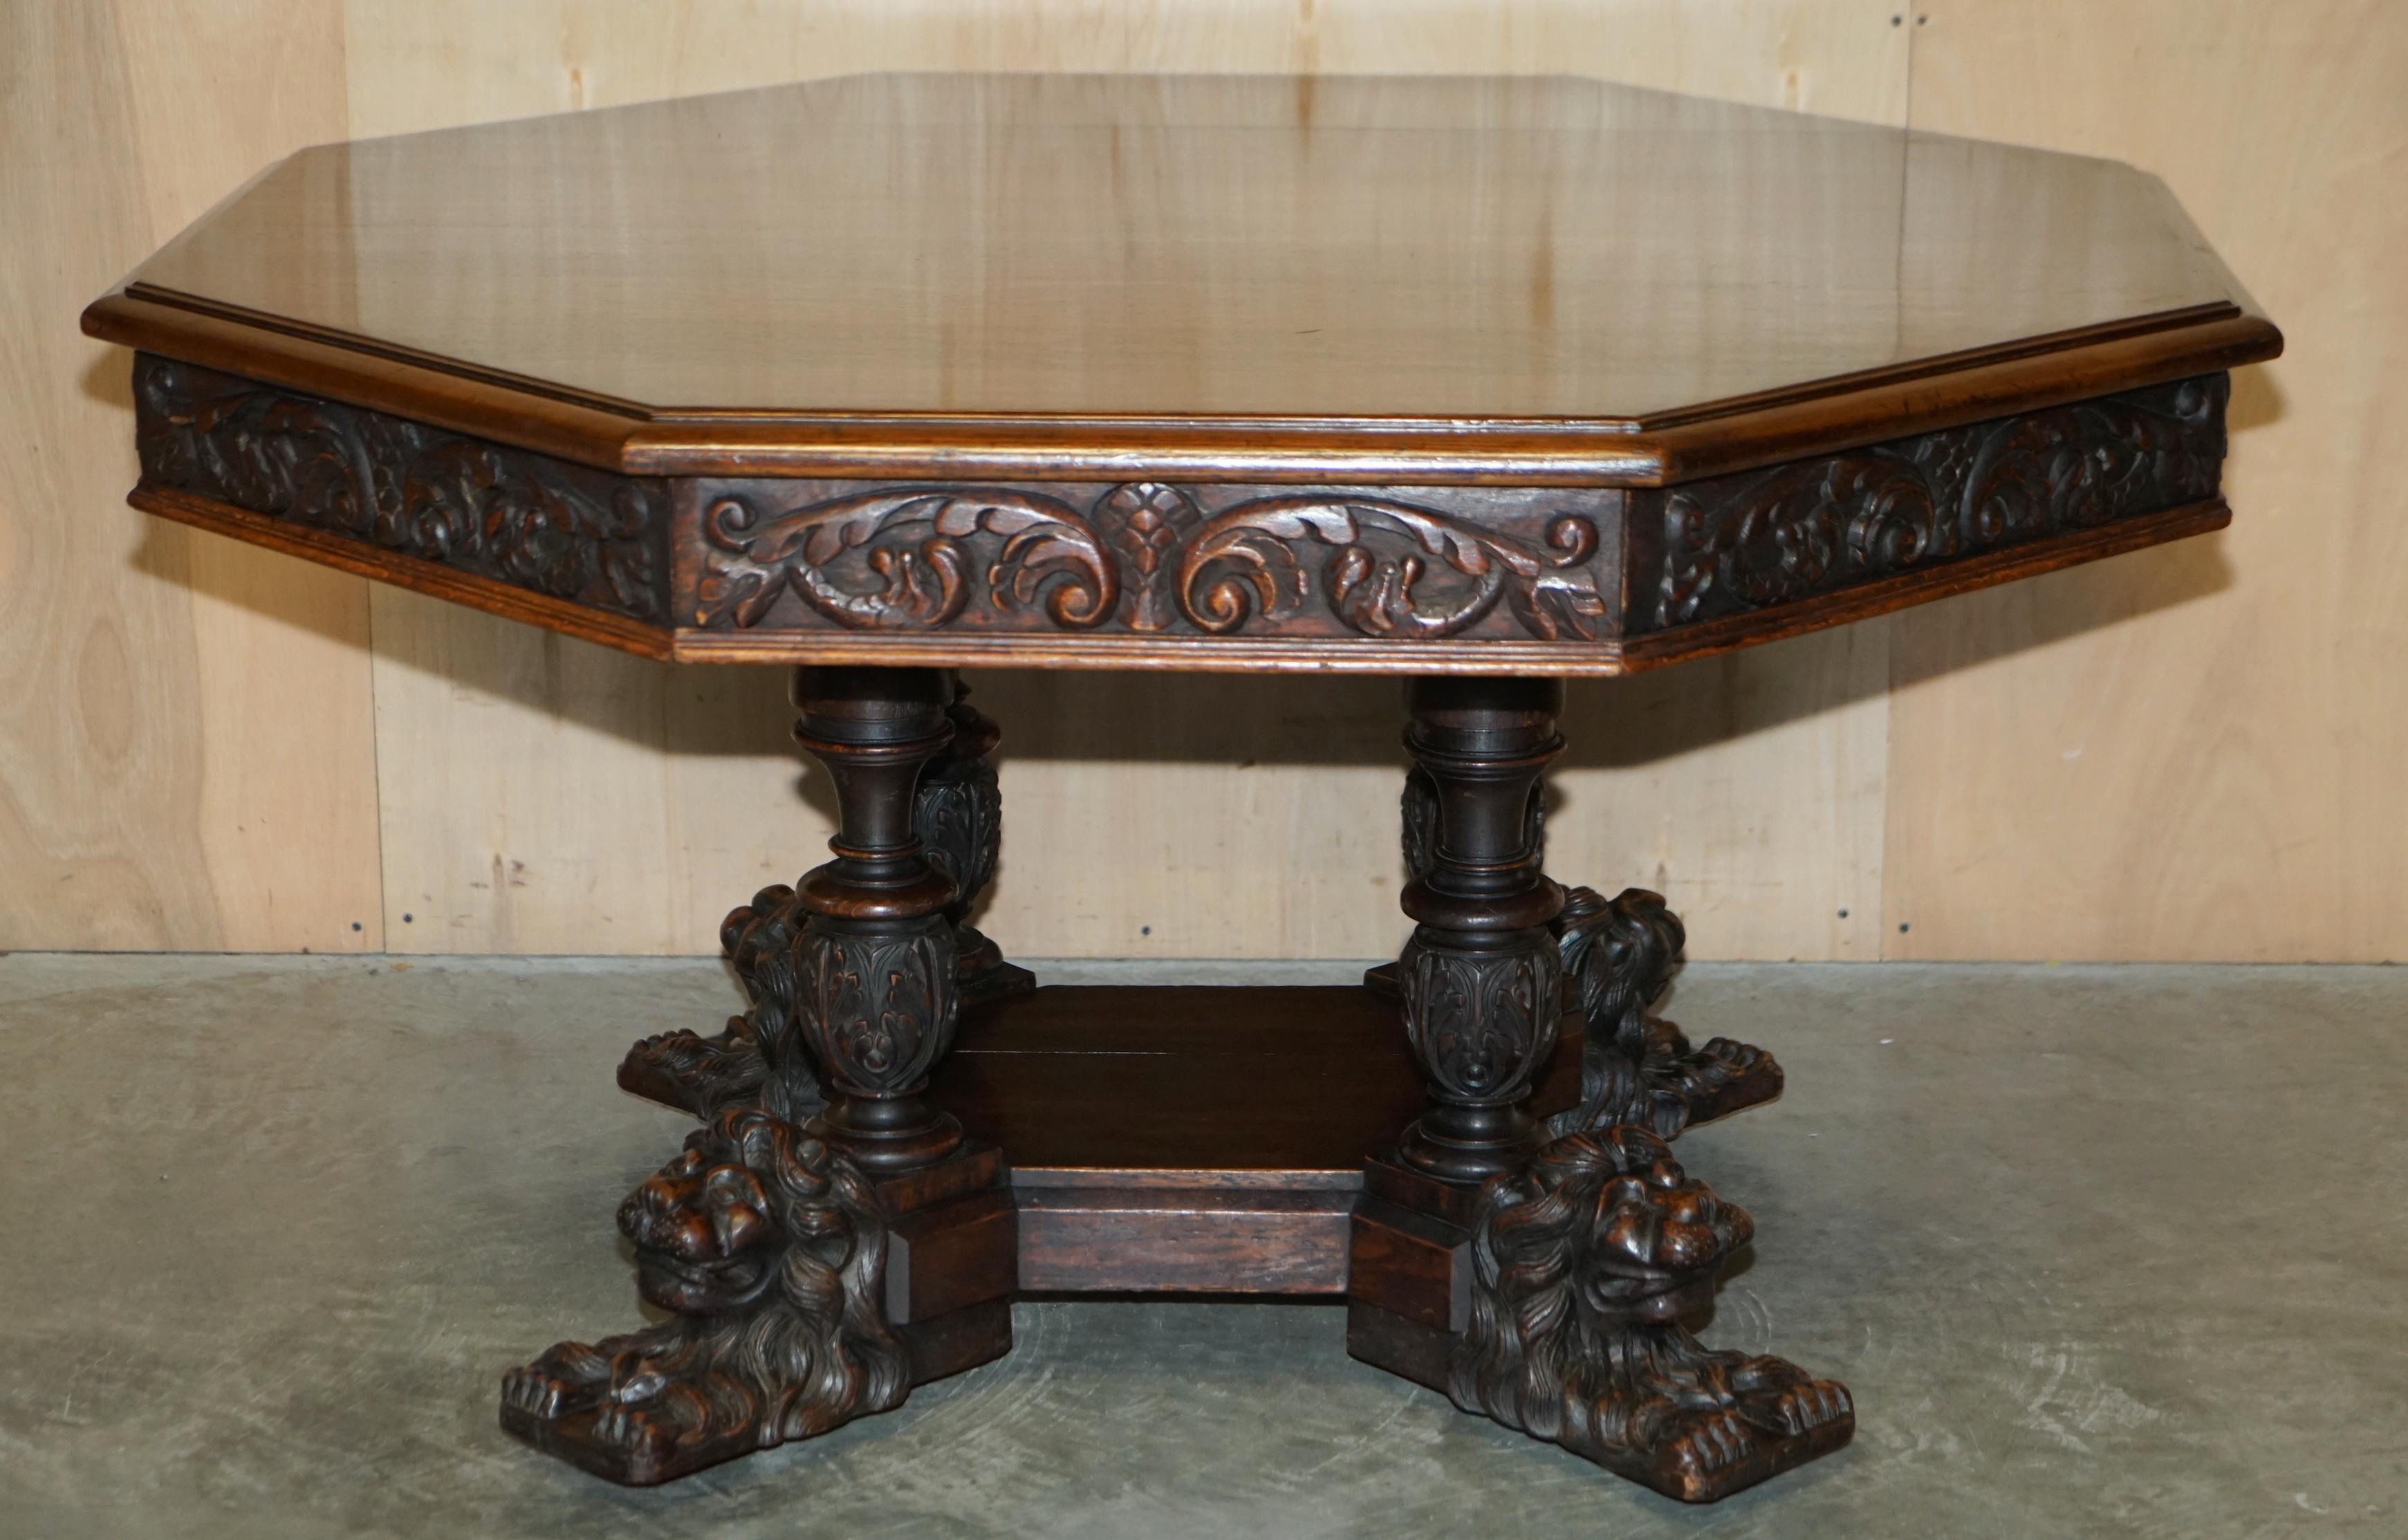 We are delighted to offer for sale this absolutely stunning, Victorian circa 1860 hand carved English oak centre table with recumbent lion legs

A very good looking well made and decorative piece, hand carved in solid oak, the legs are some of the